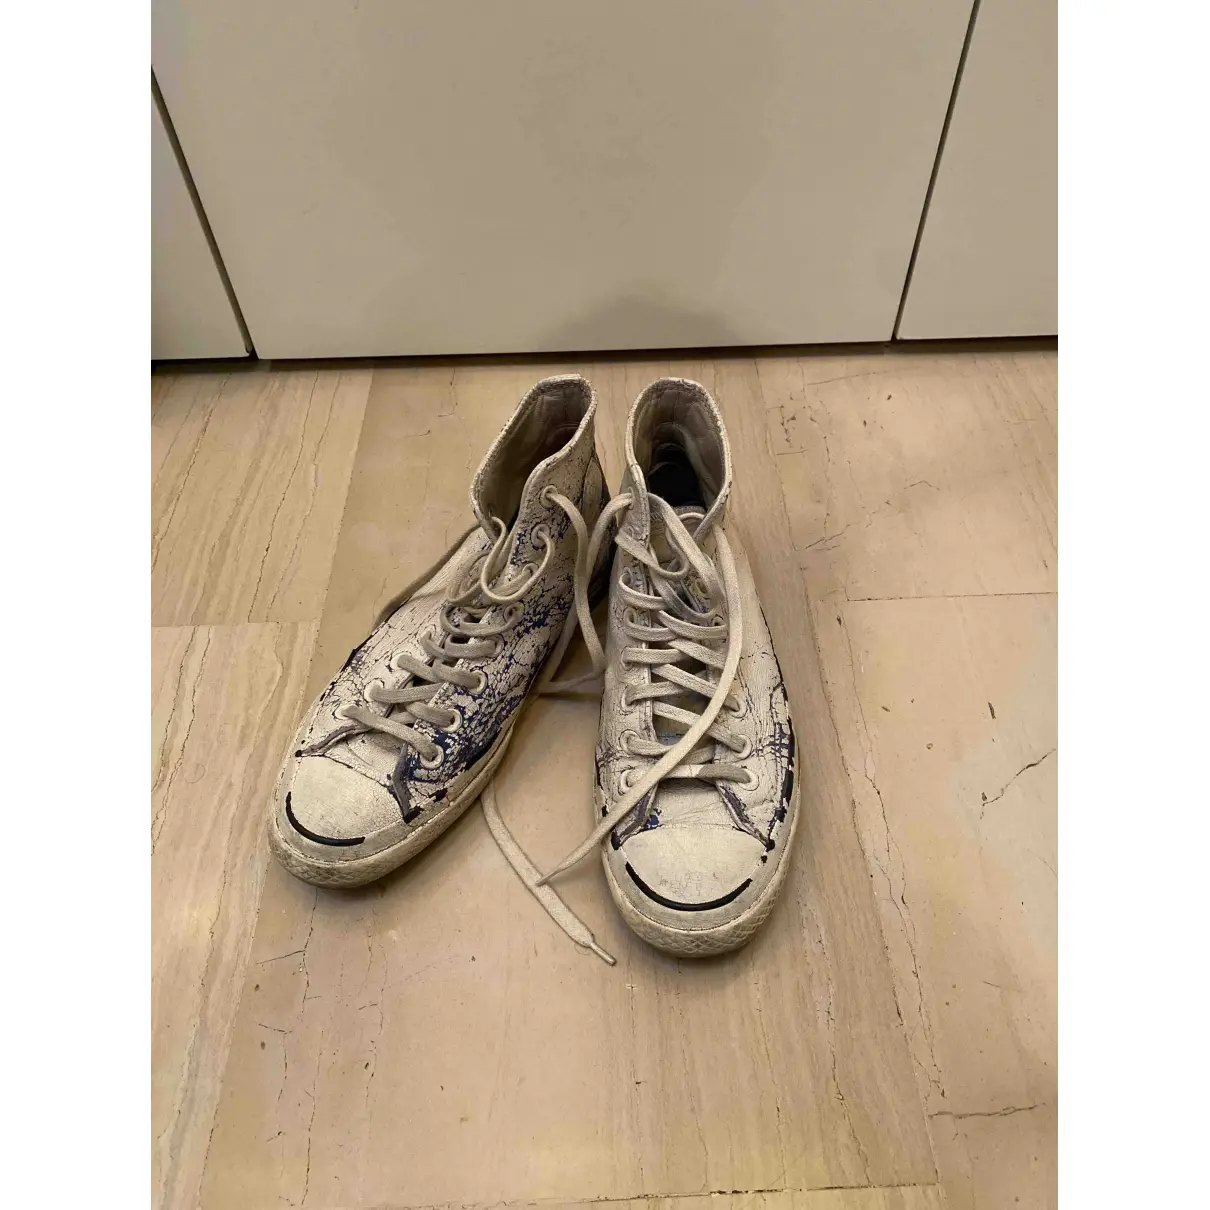 Buy Maison Martin Margiela x Converse Leather high trainers online